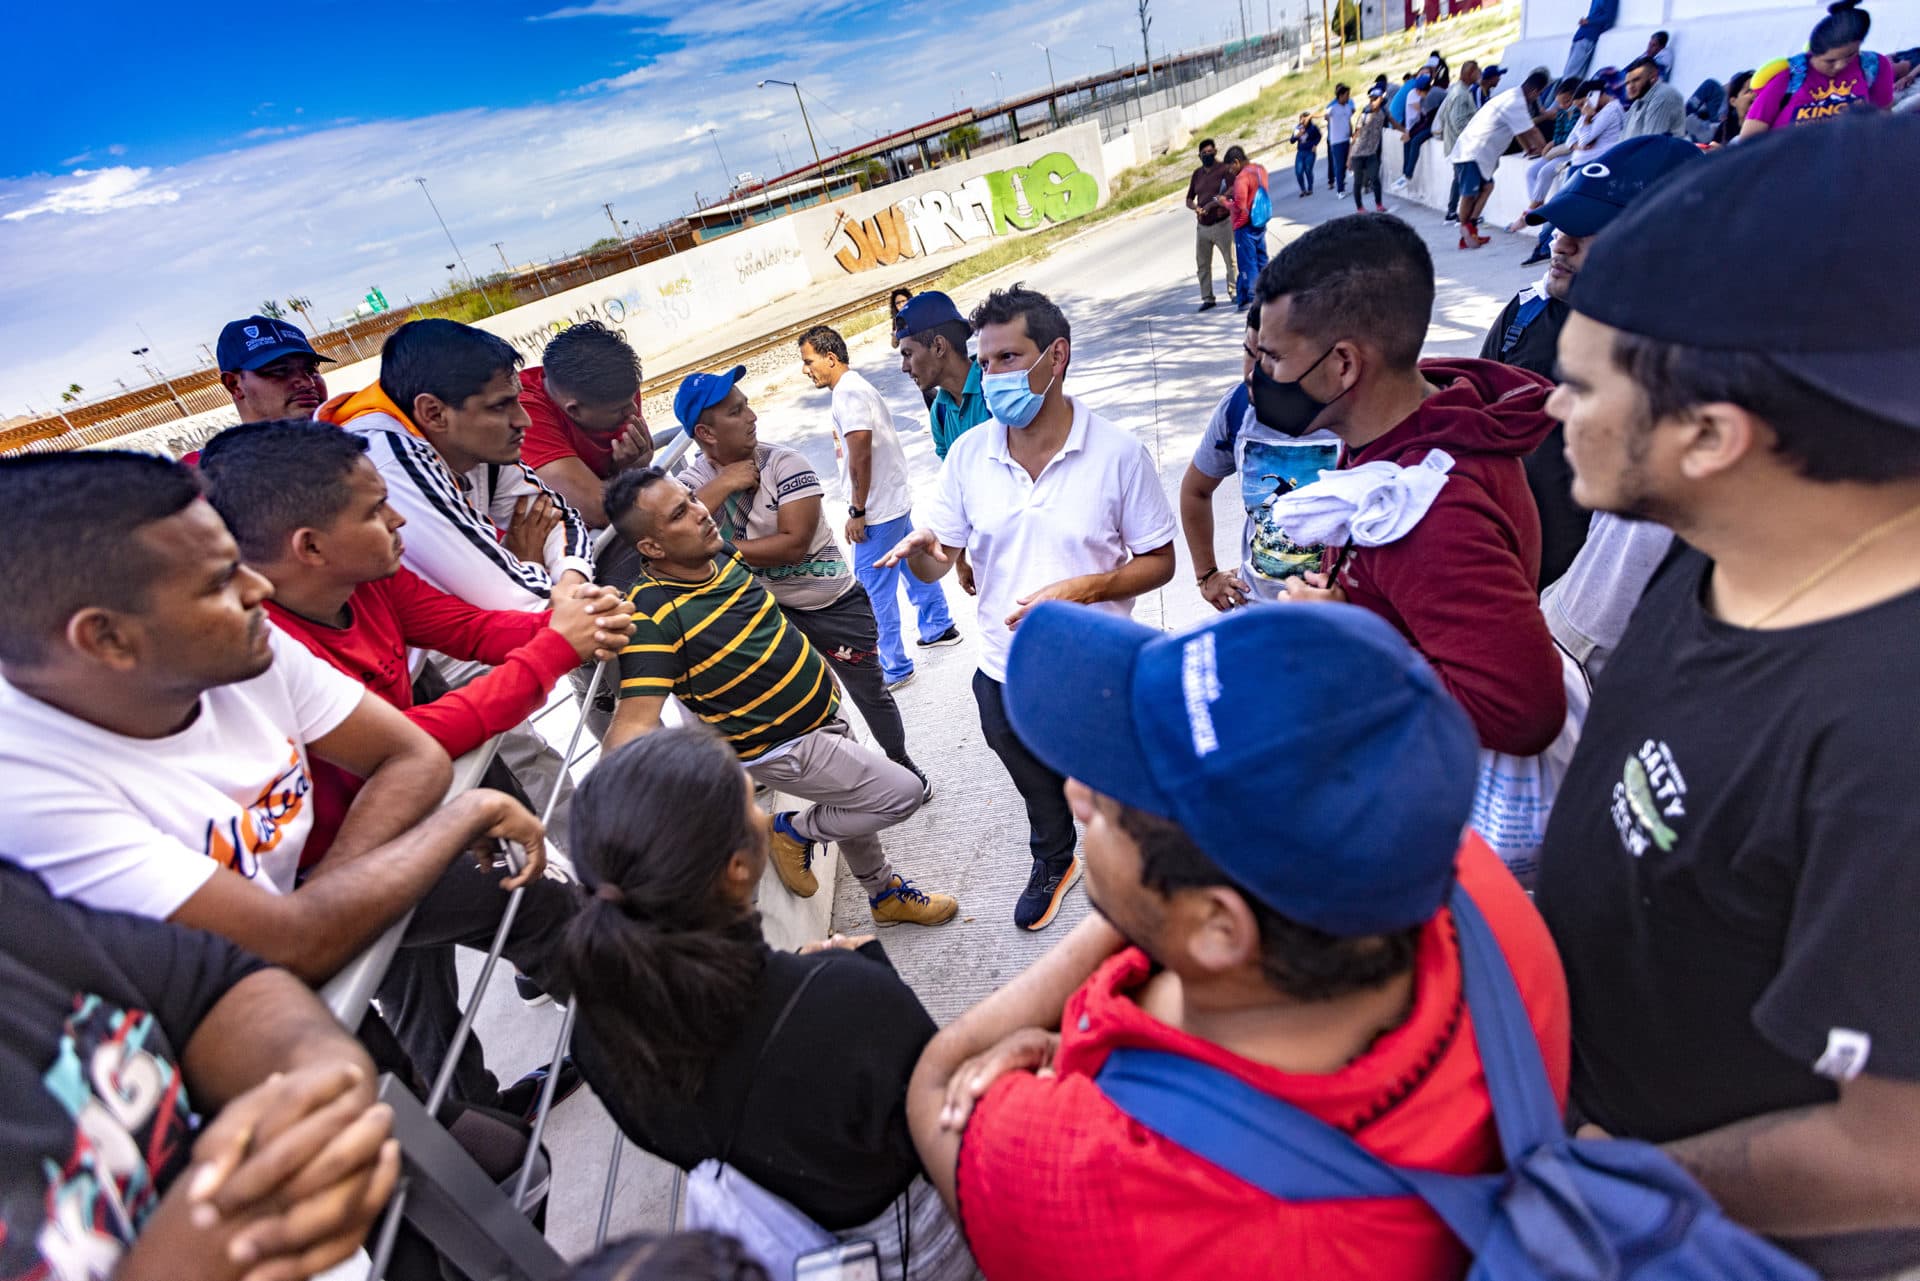 Lawyers for Civil Rights Executive Director, Iván Espinoza-Madrigal, speaks with the Venezuelan immigrants in Ciudad Juarez waiting to cross the border into the U.S. listening to their stories and trying to explain what their options are, if any. (Jesse Costa/WBUR)